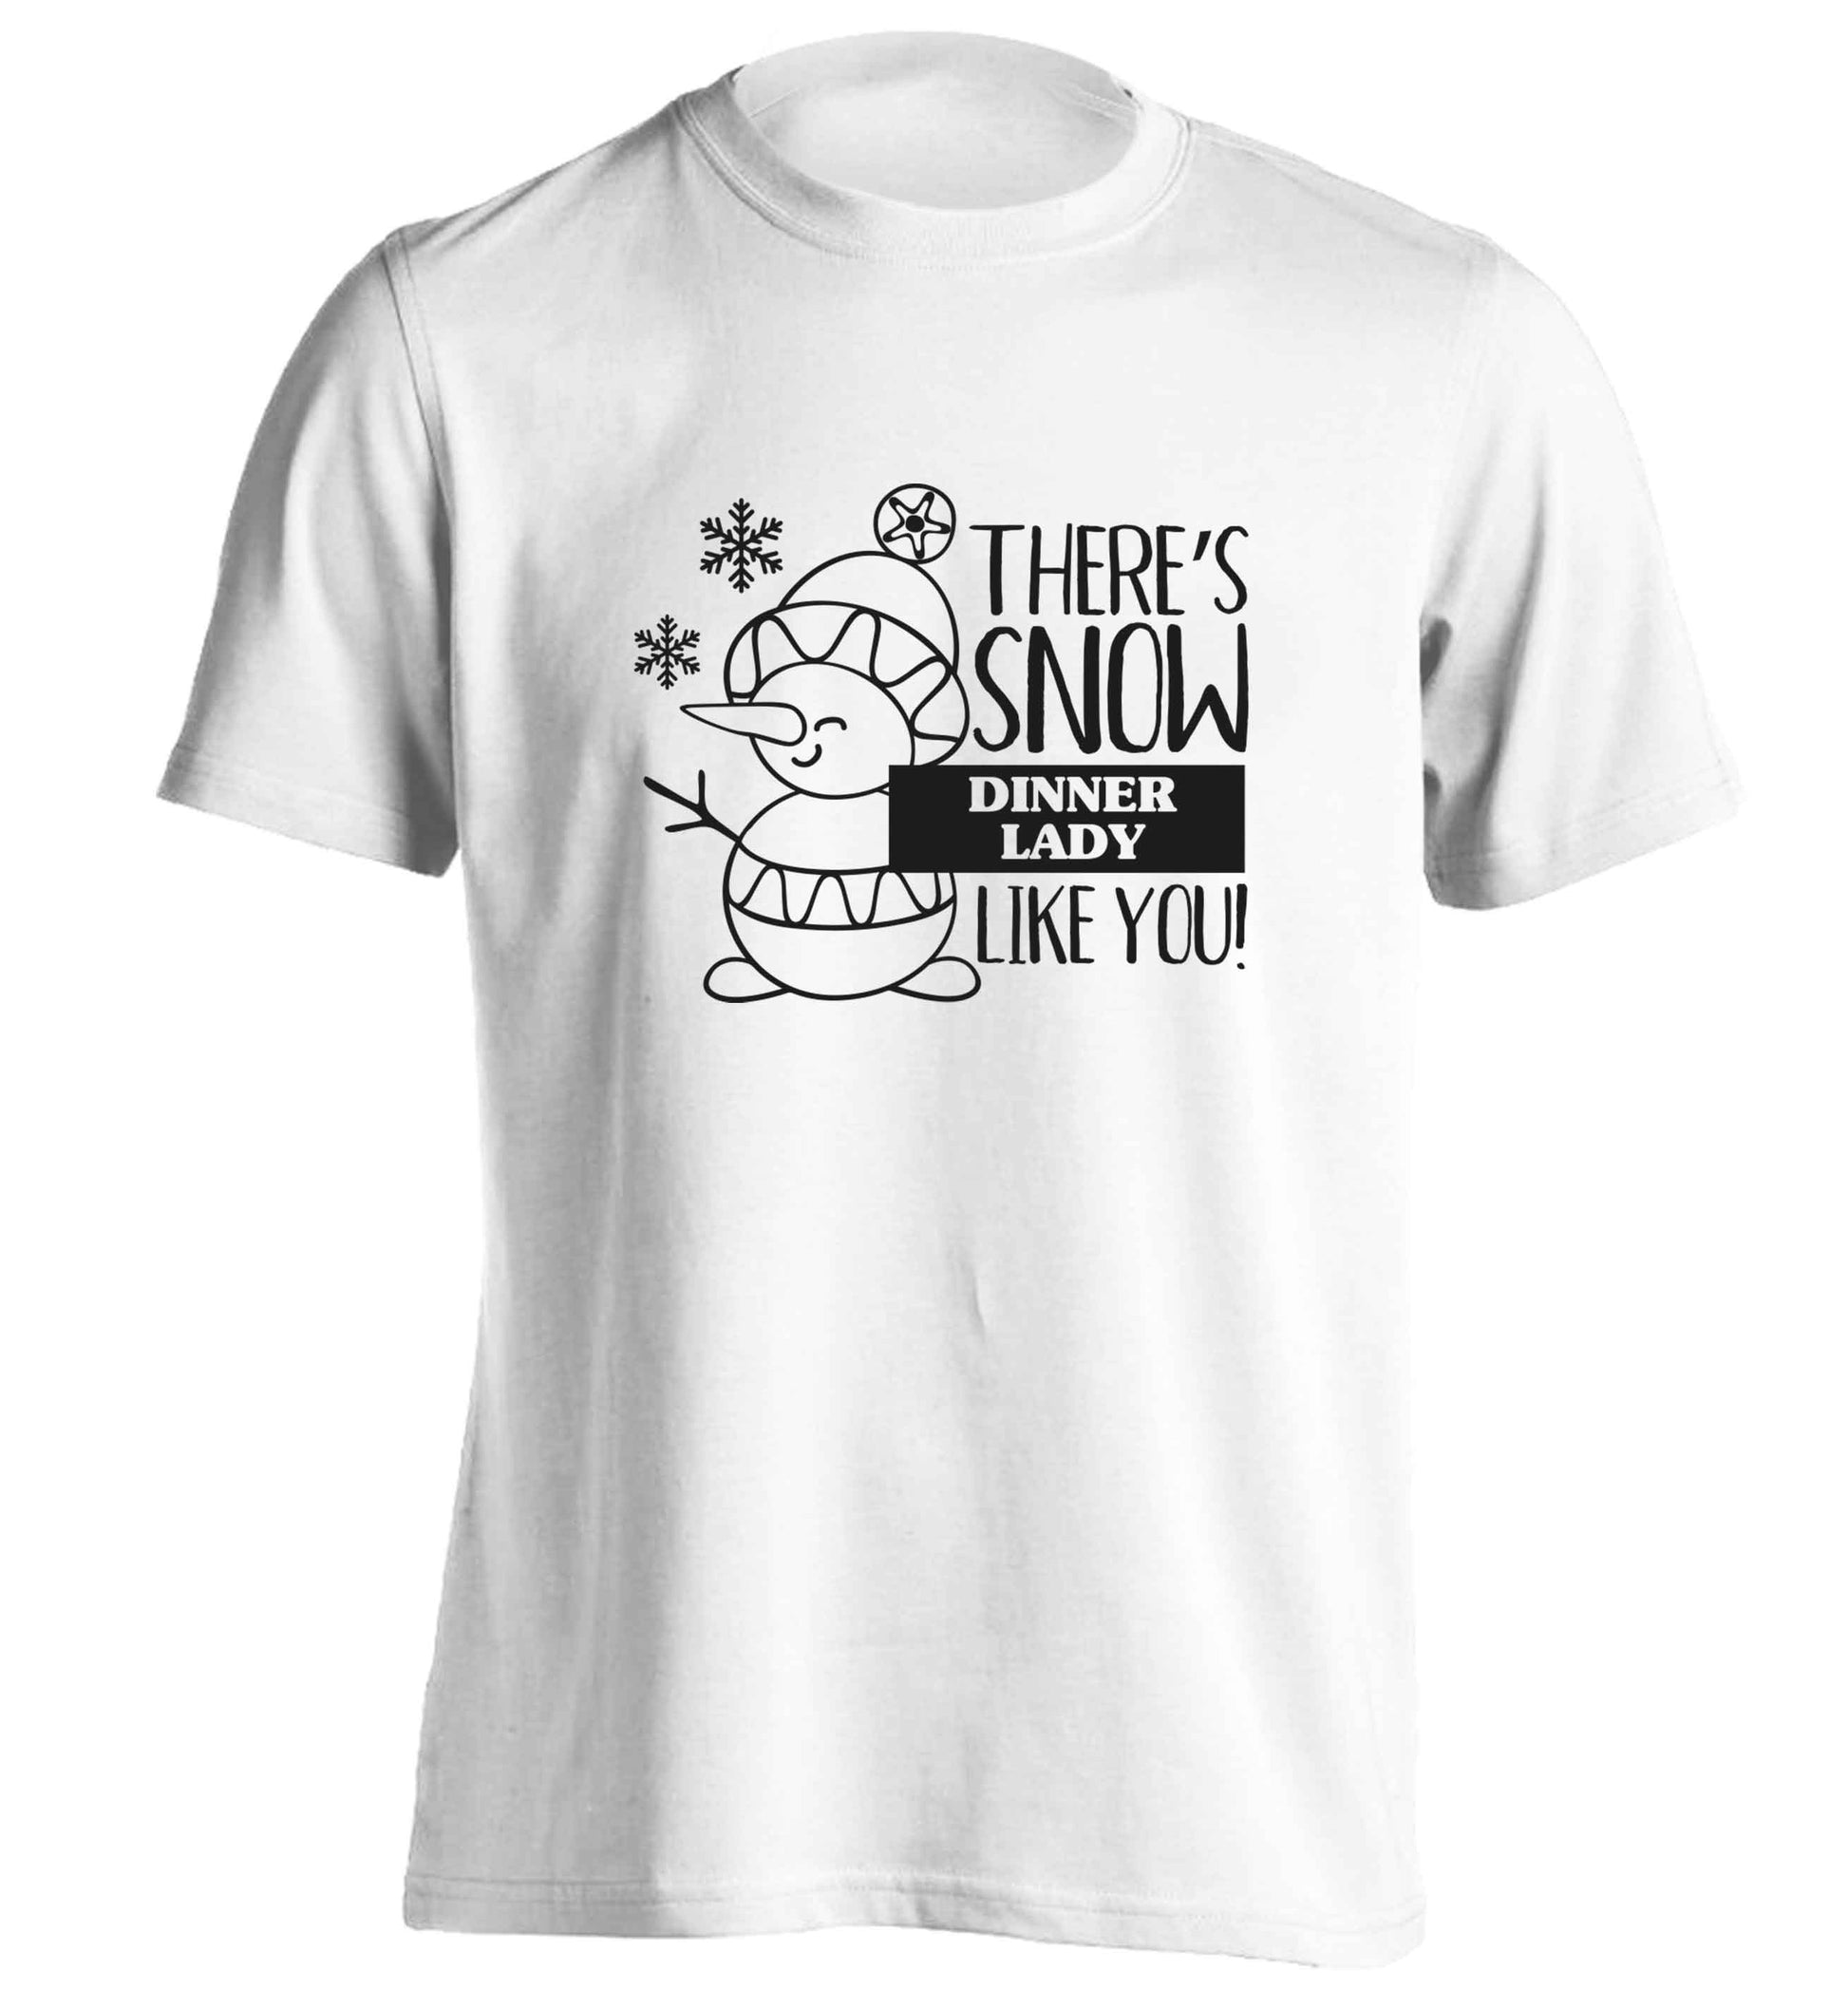 There's snow dinner lady like you adults unisex white Tshirt 2XL